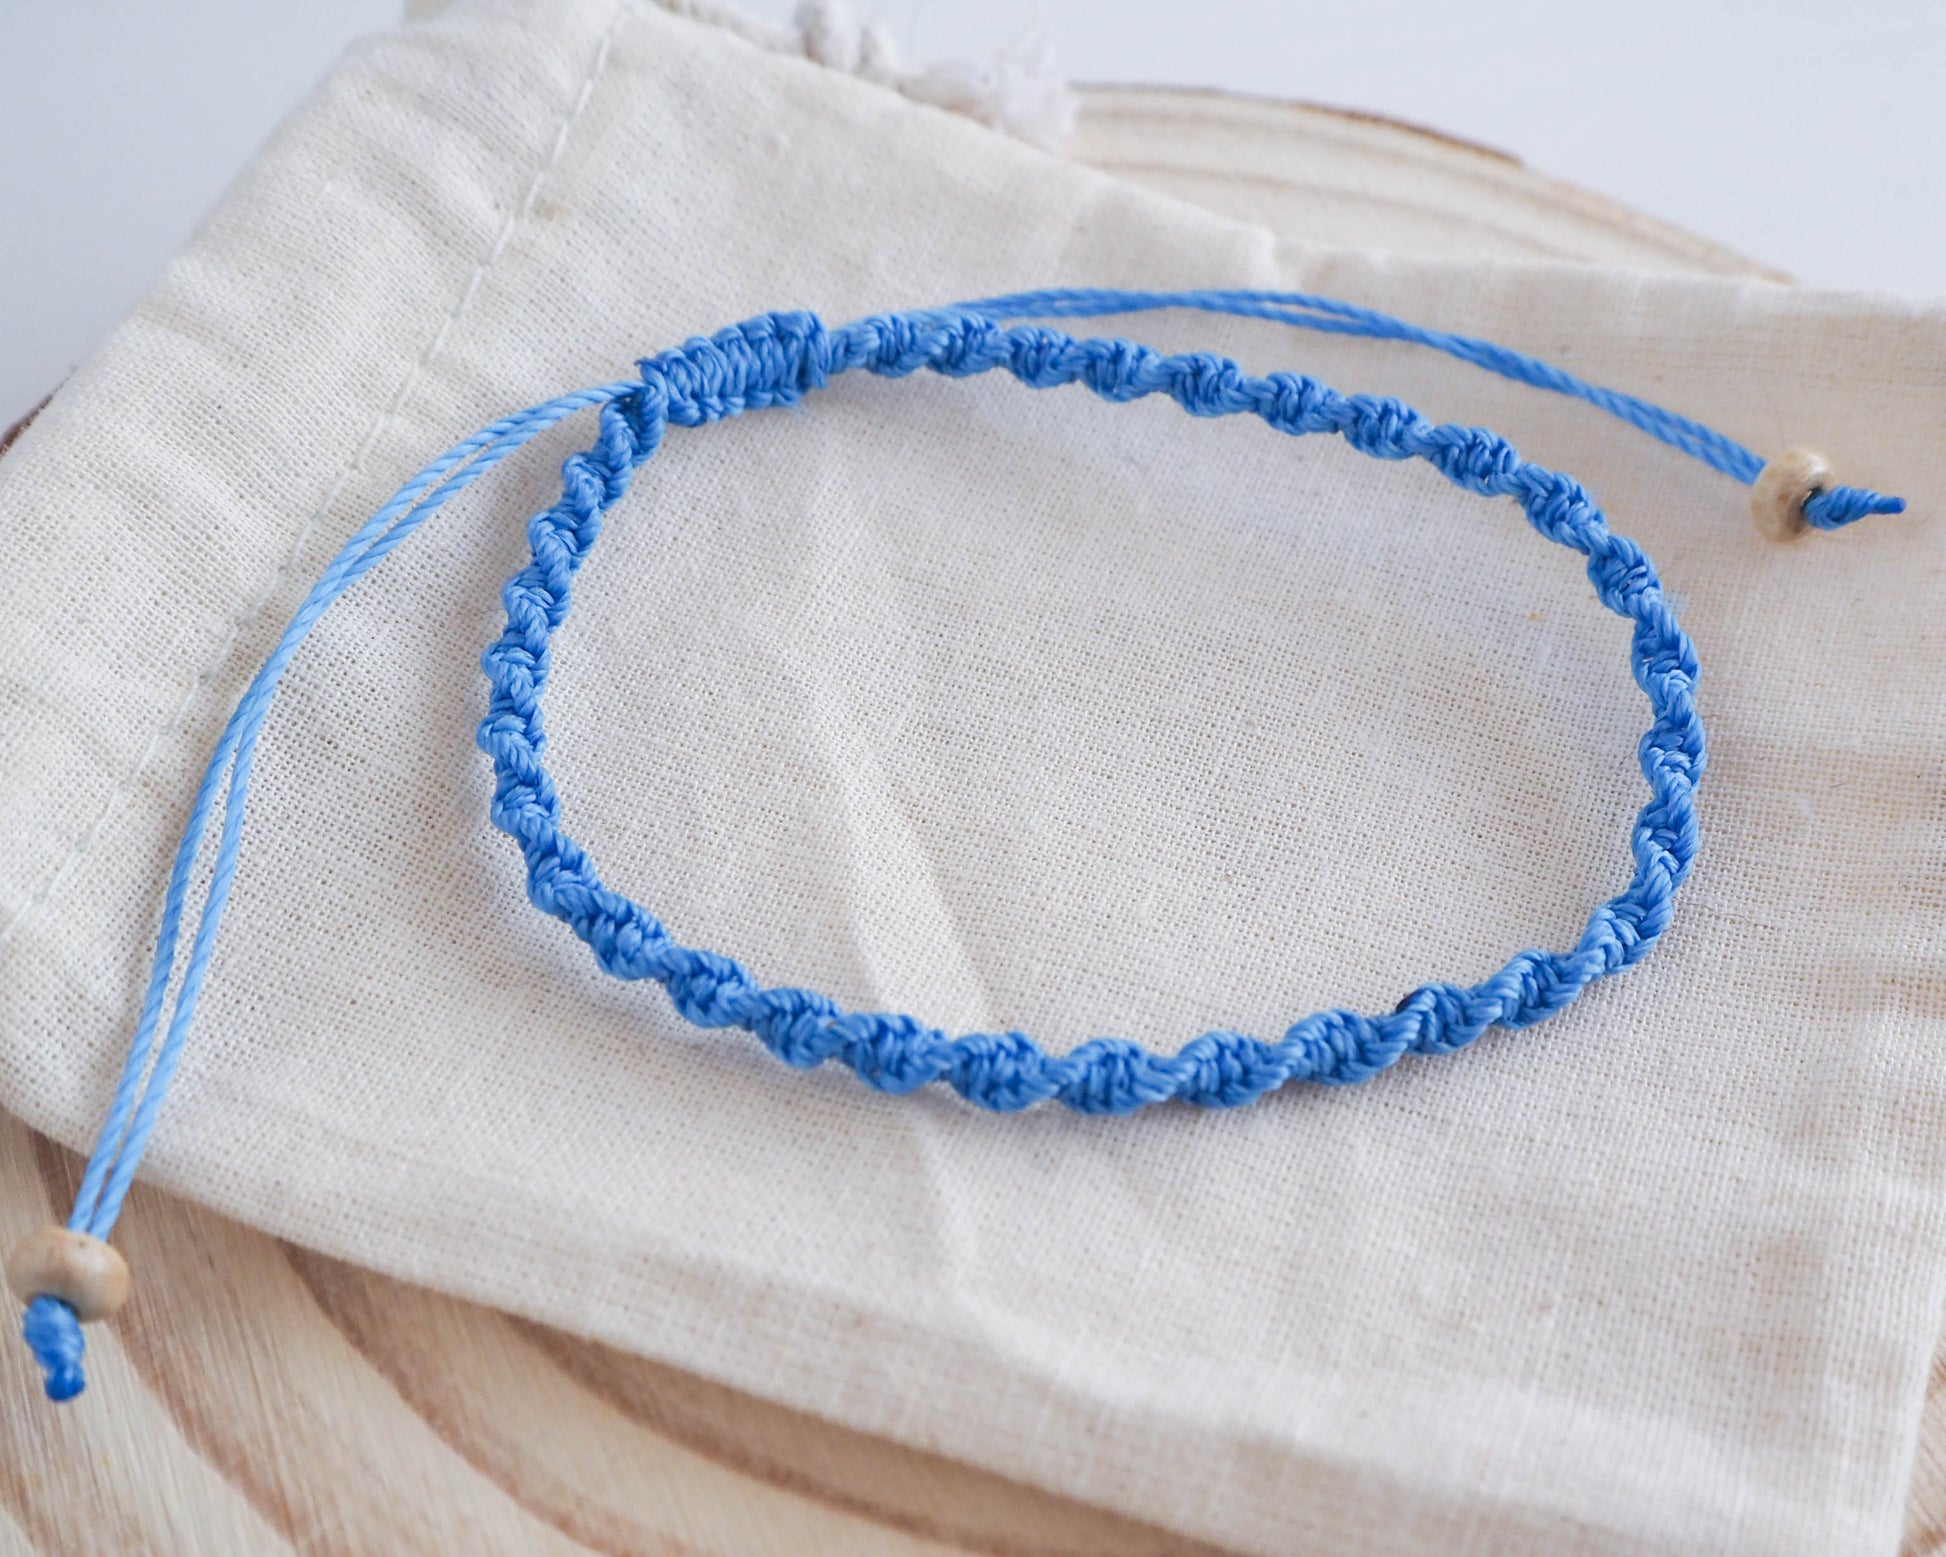 Beach Girls' Favorite: Set of 5 Knotted Cord Bracelets